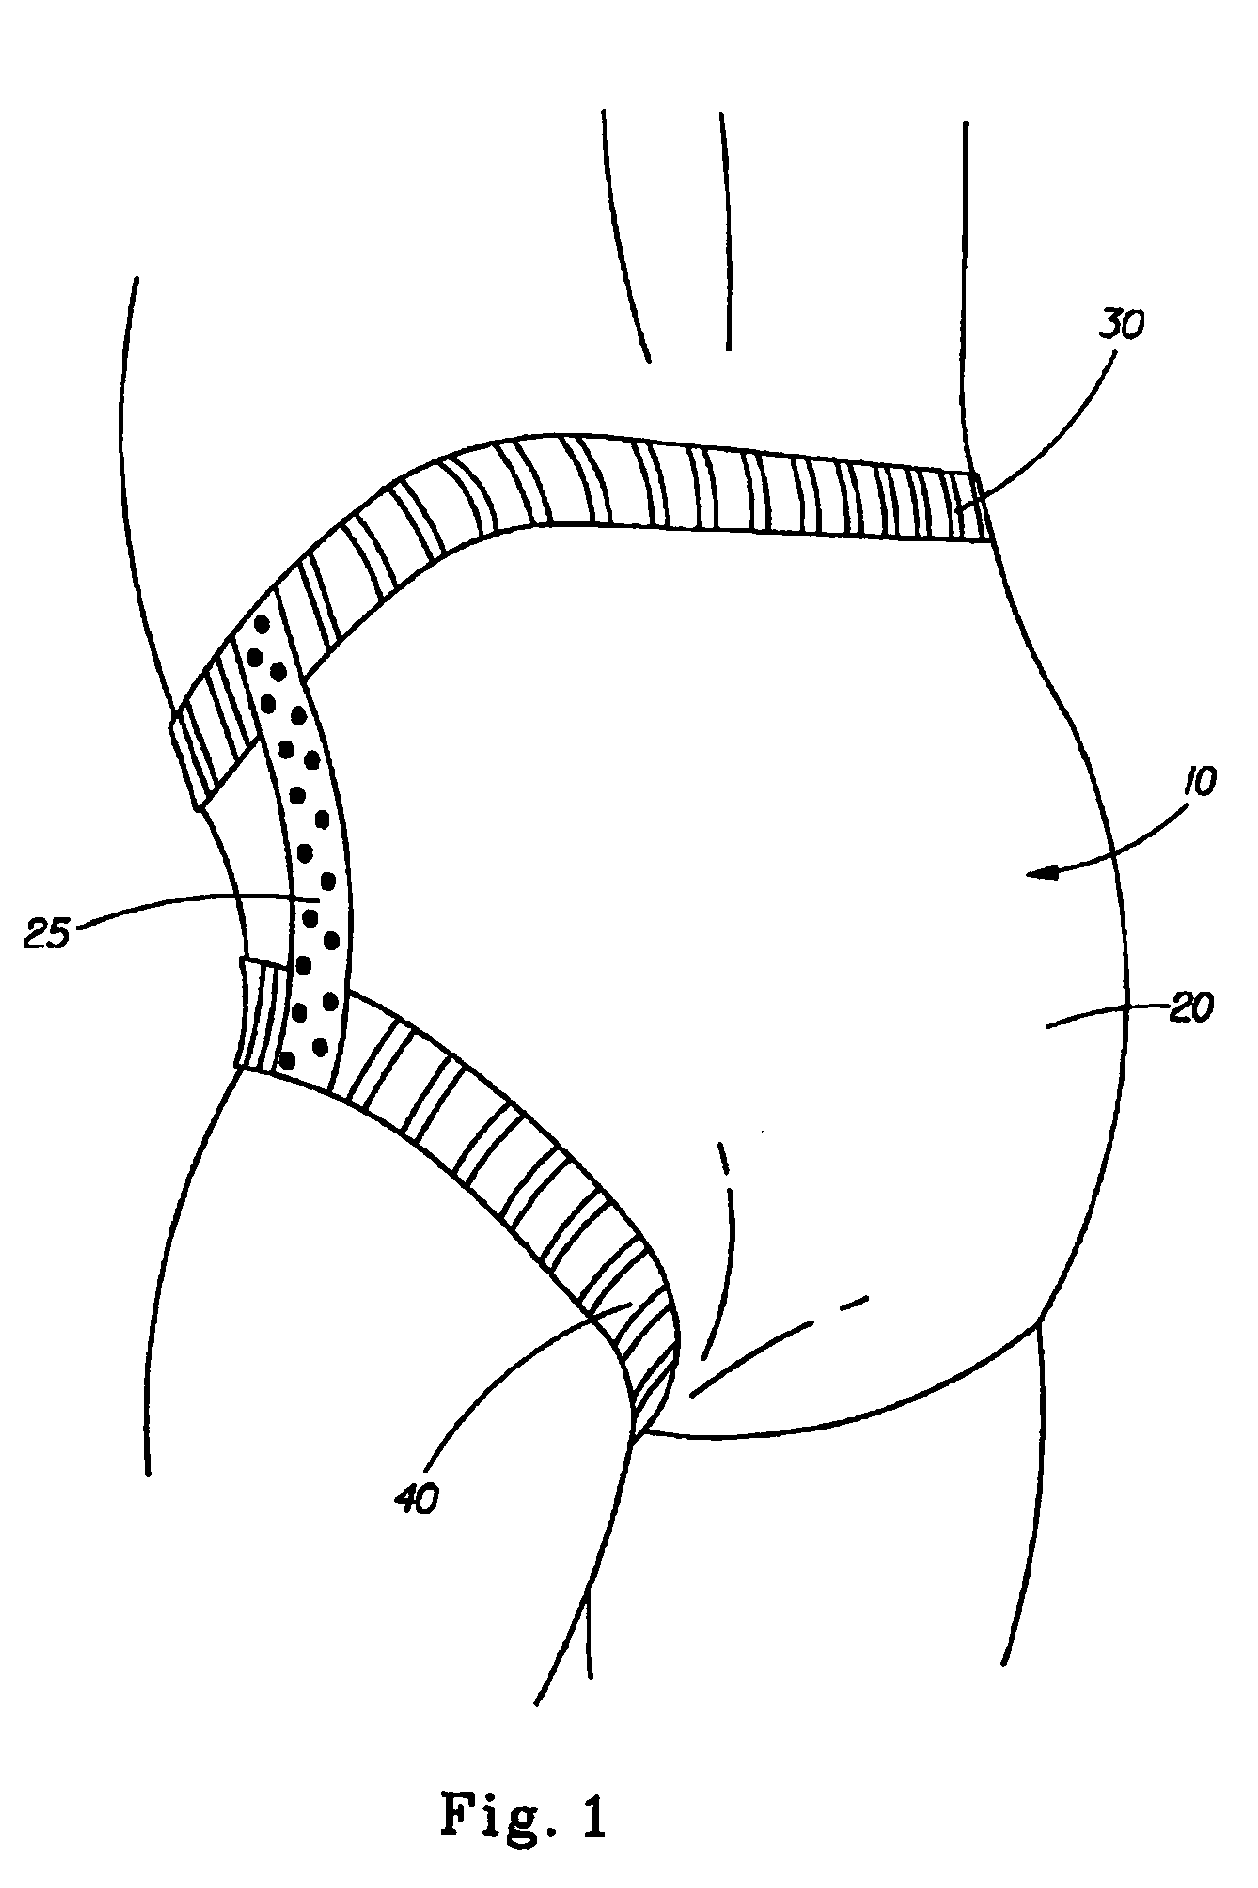 System and Method for High-Speed Continuous Application of a Strip Material to a Moving Sheet-Like Substrate Material at Laterally Shifting Locations